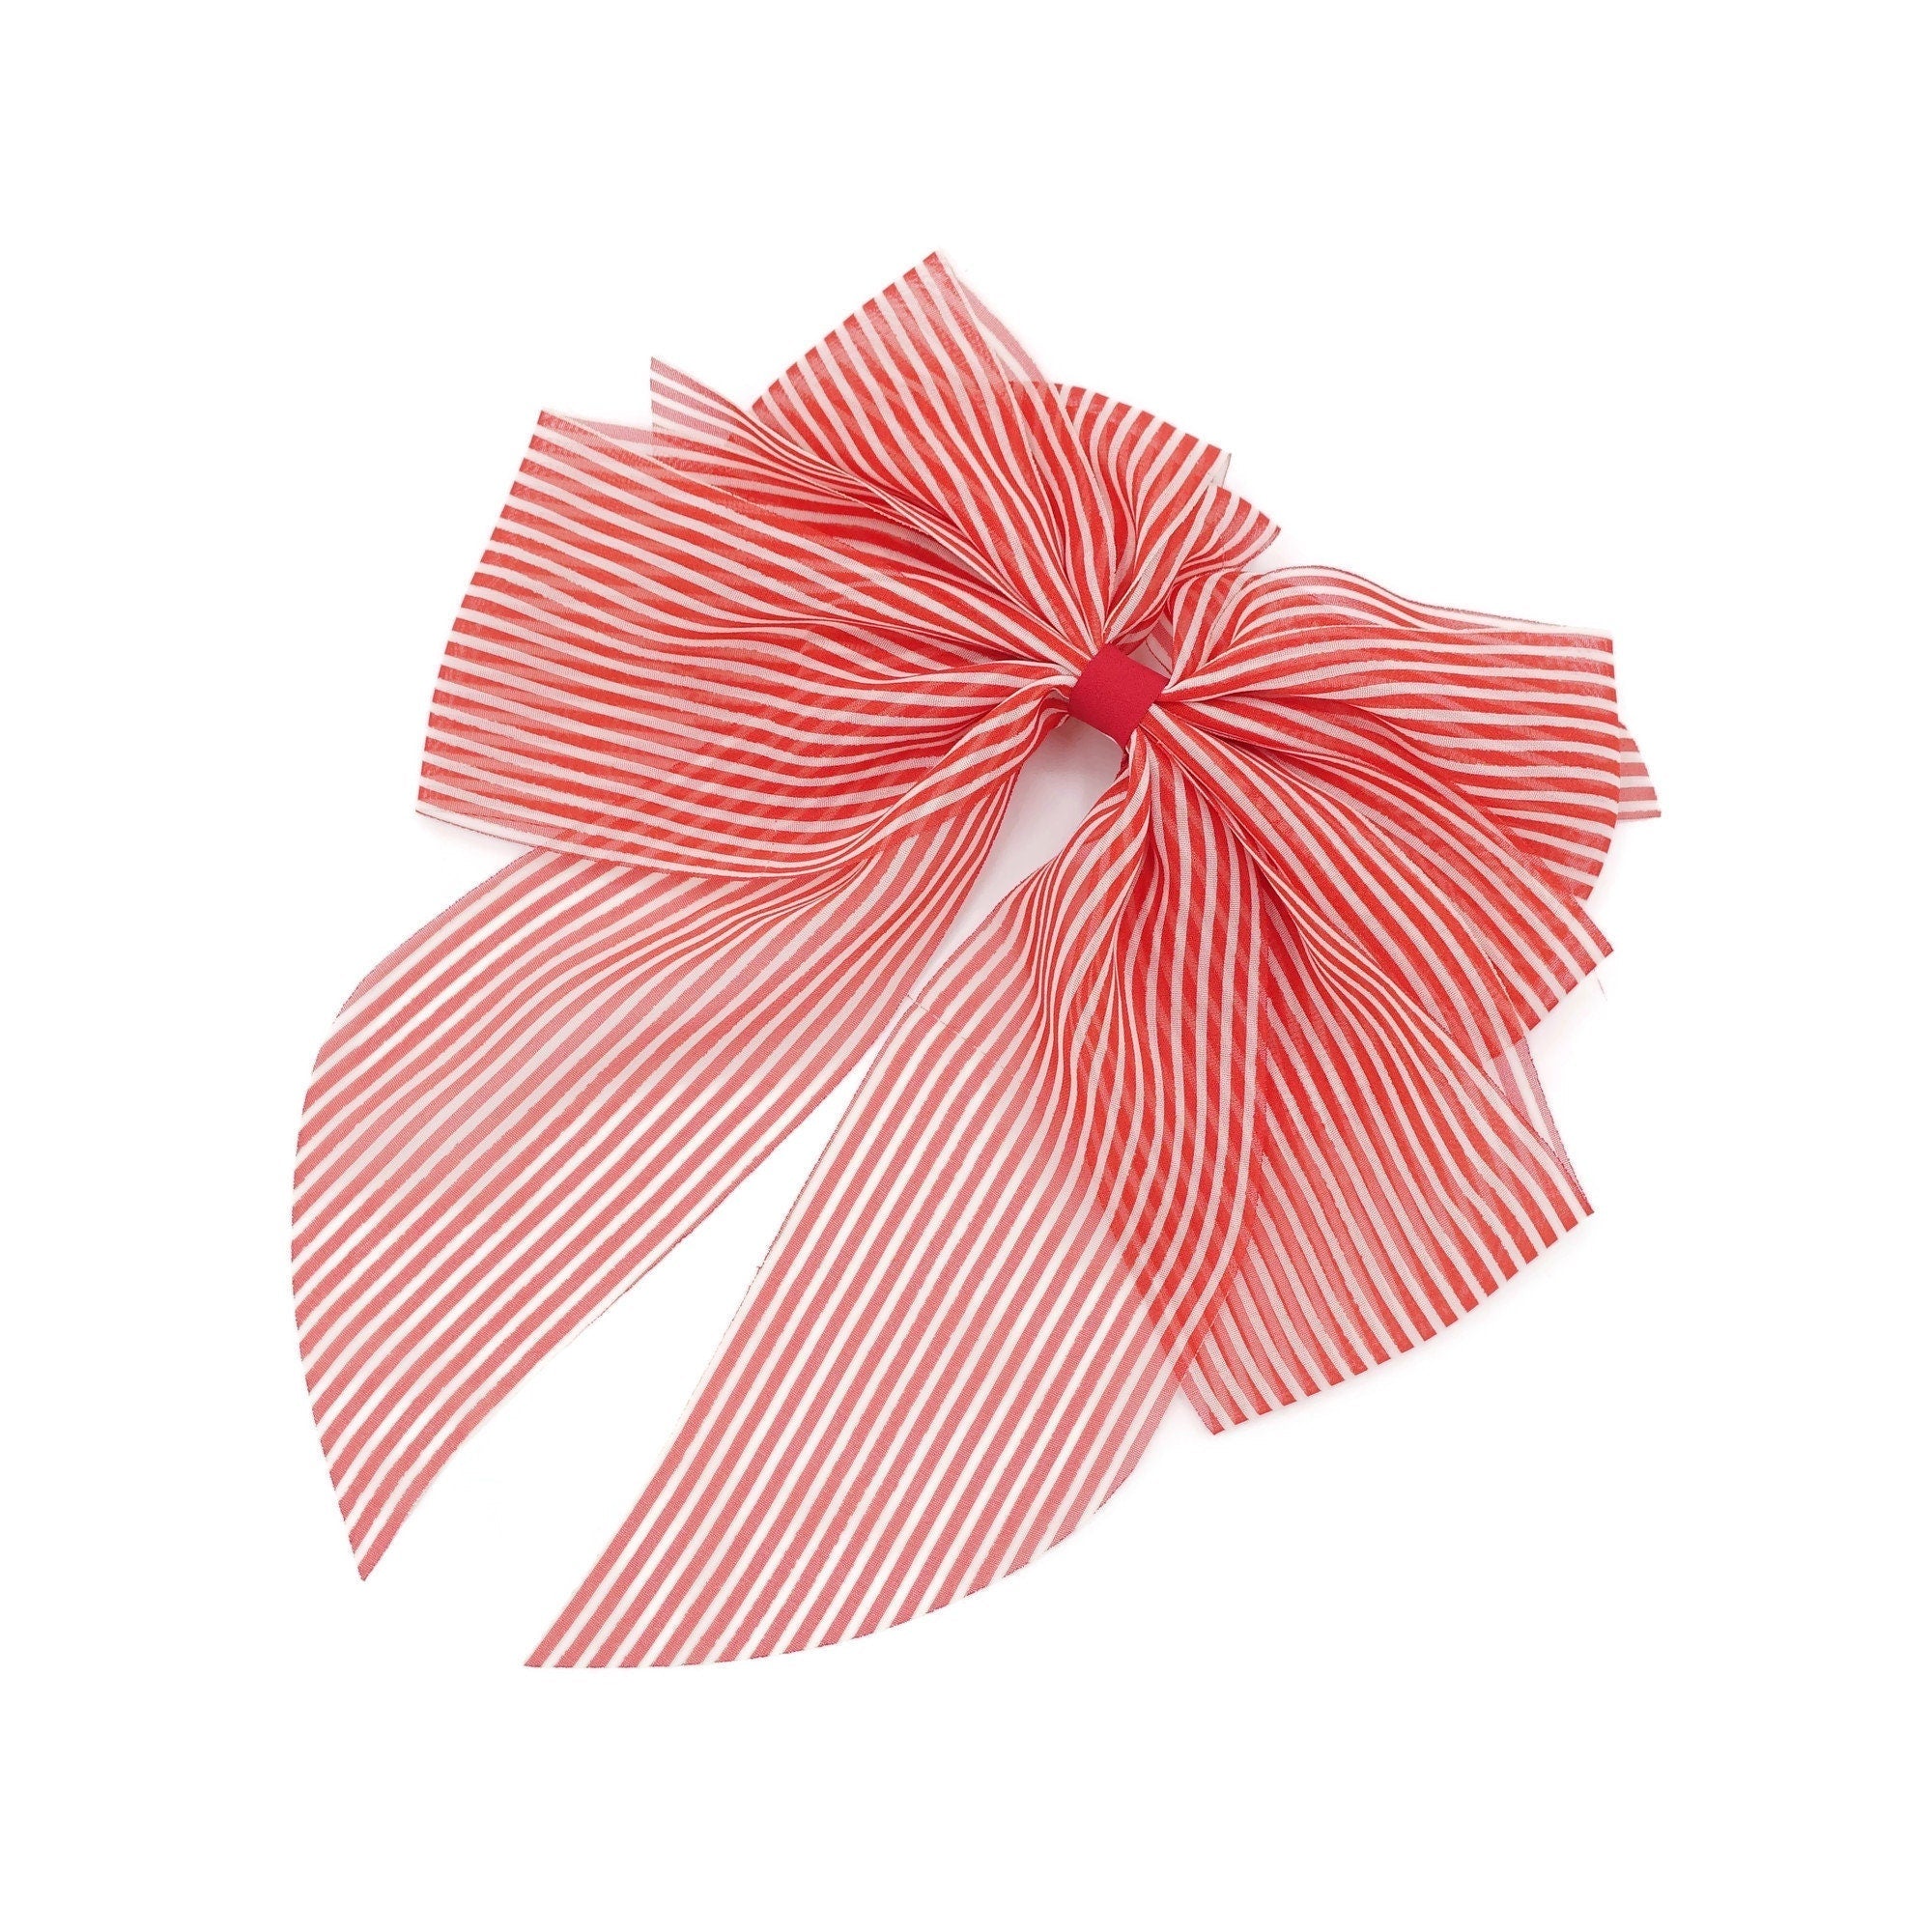 VeryShine Barrette (Bow) Red narrow stripe hair bow layered style tail hair accessory for women